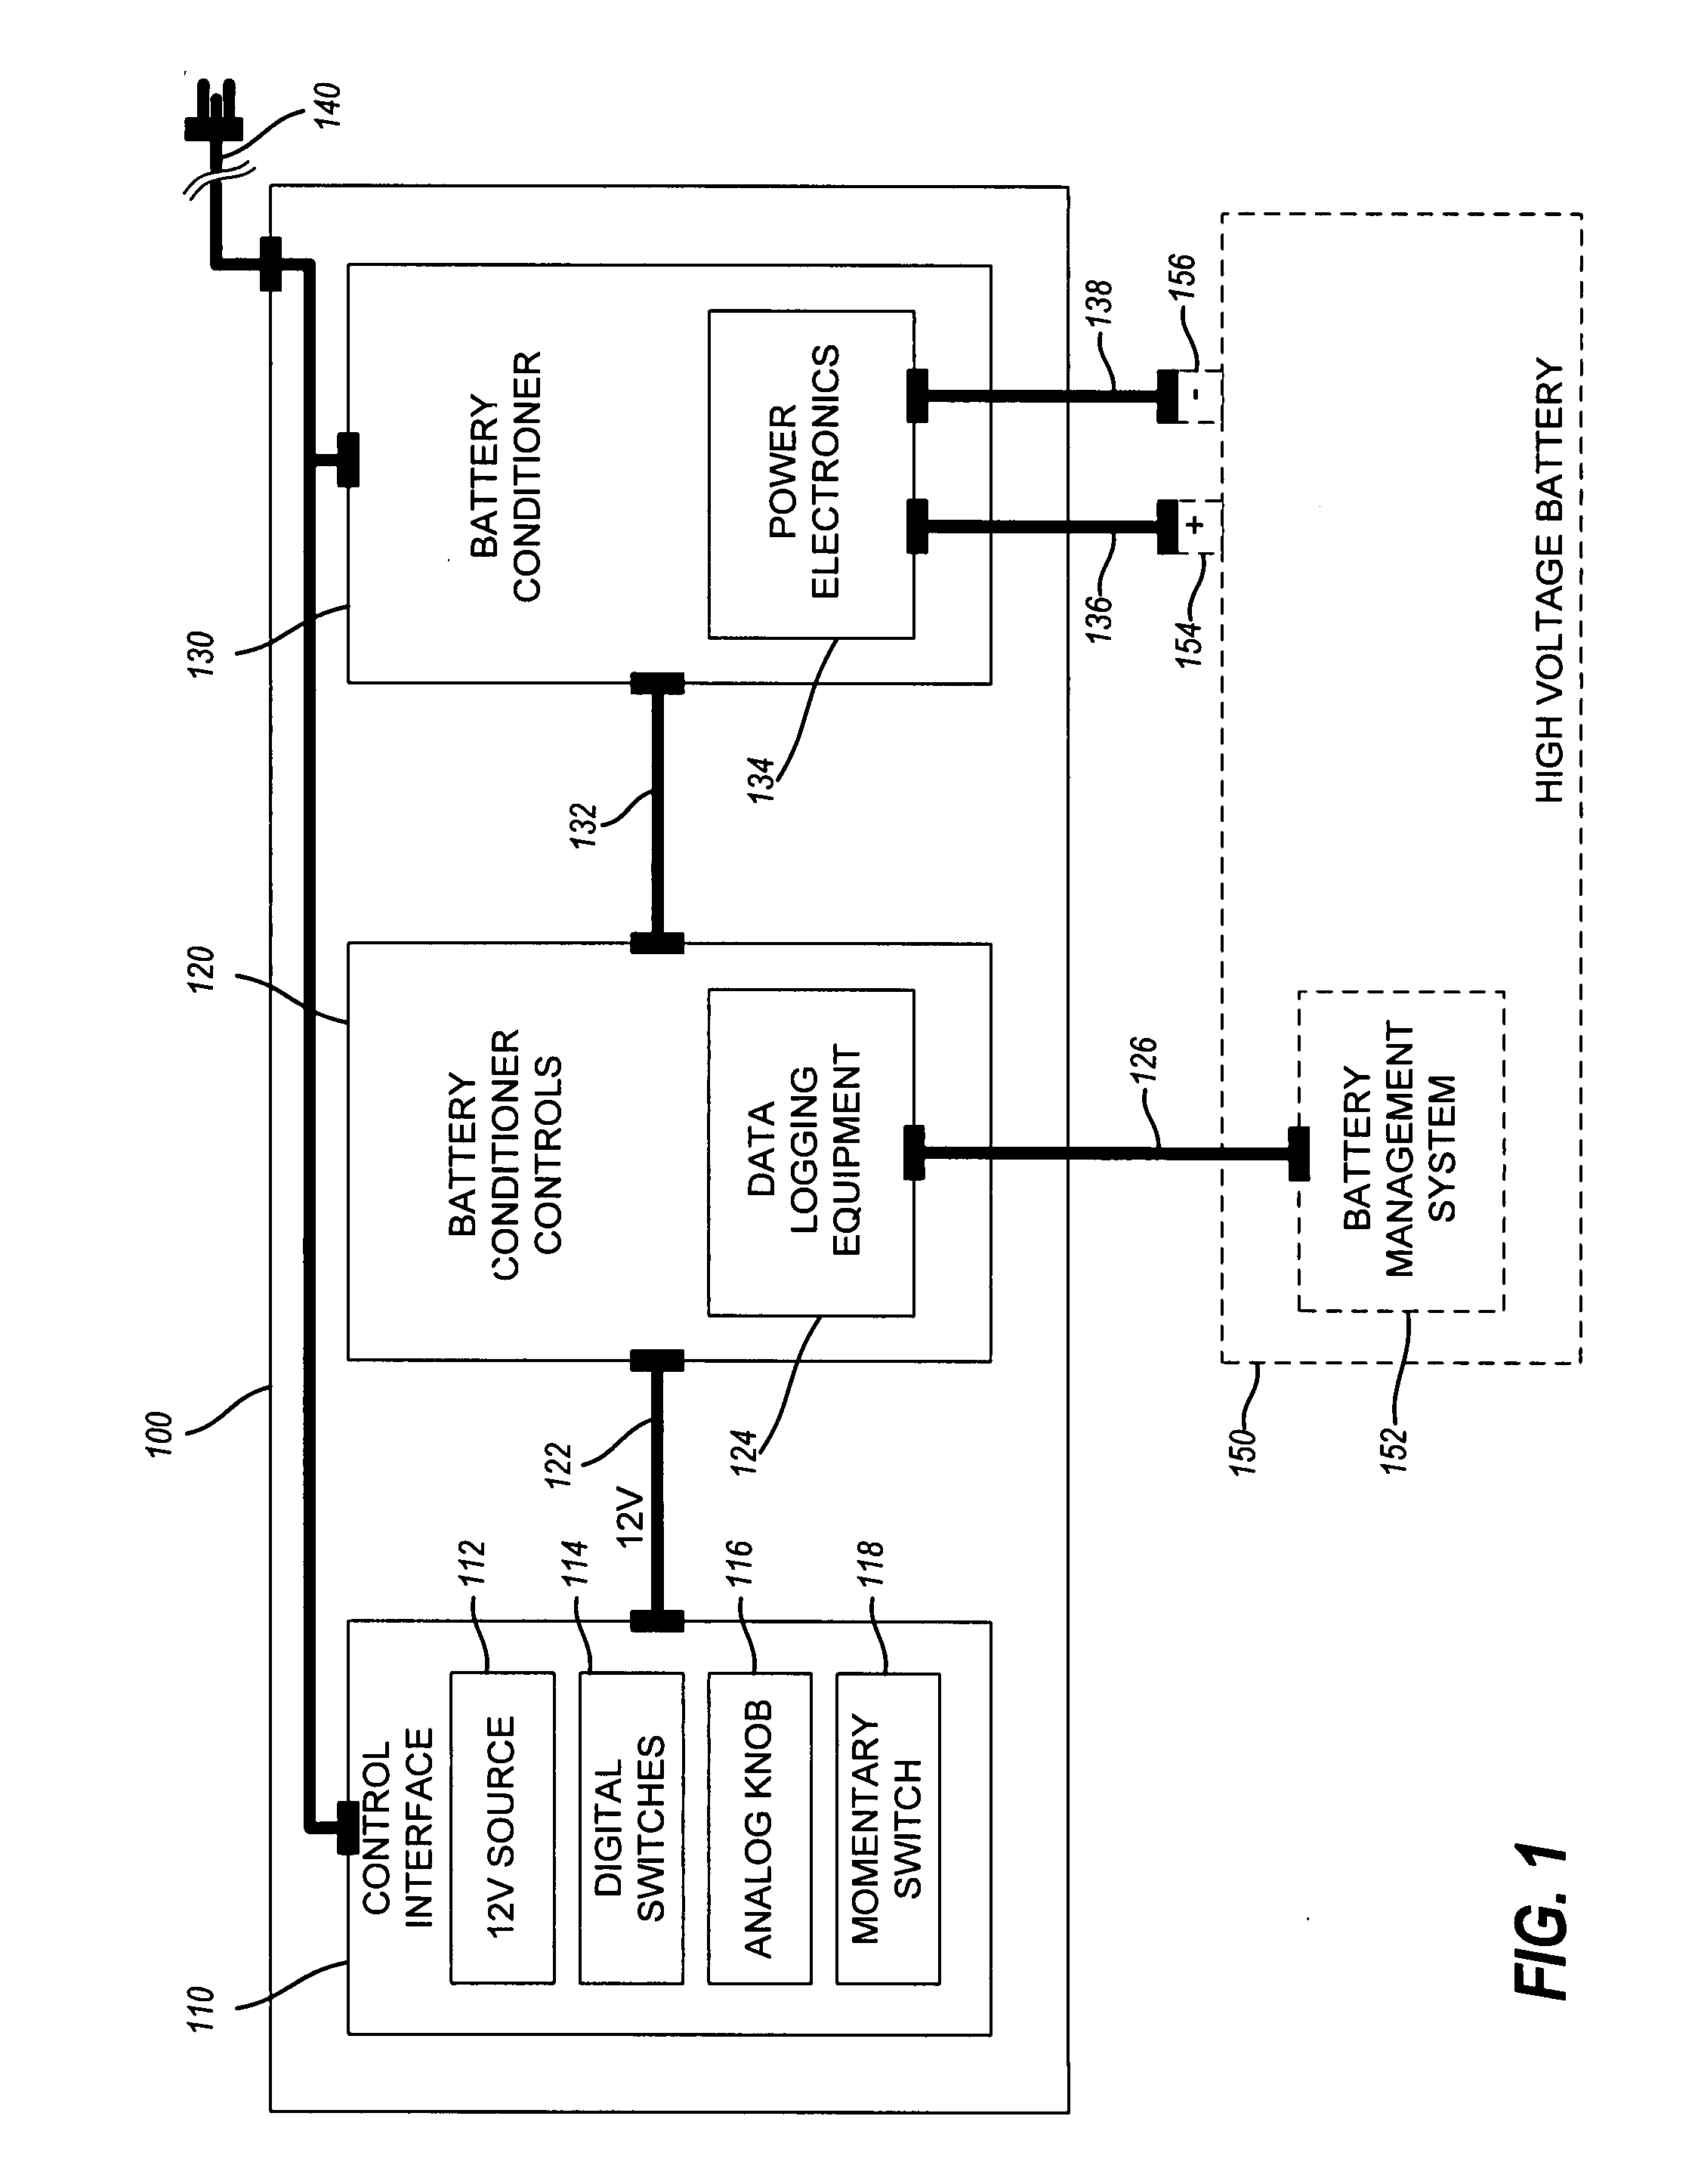 Systems and methods for intelligent charging and intelligent conditioning of a high voltage battery